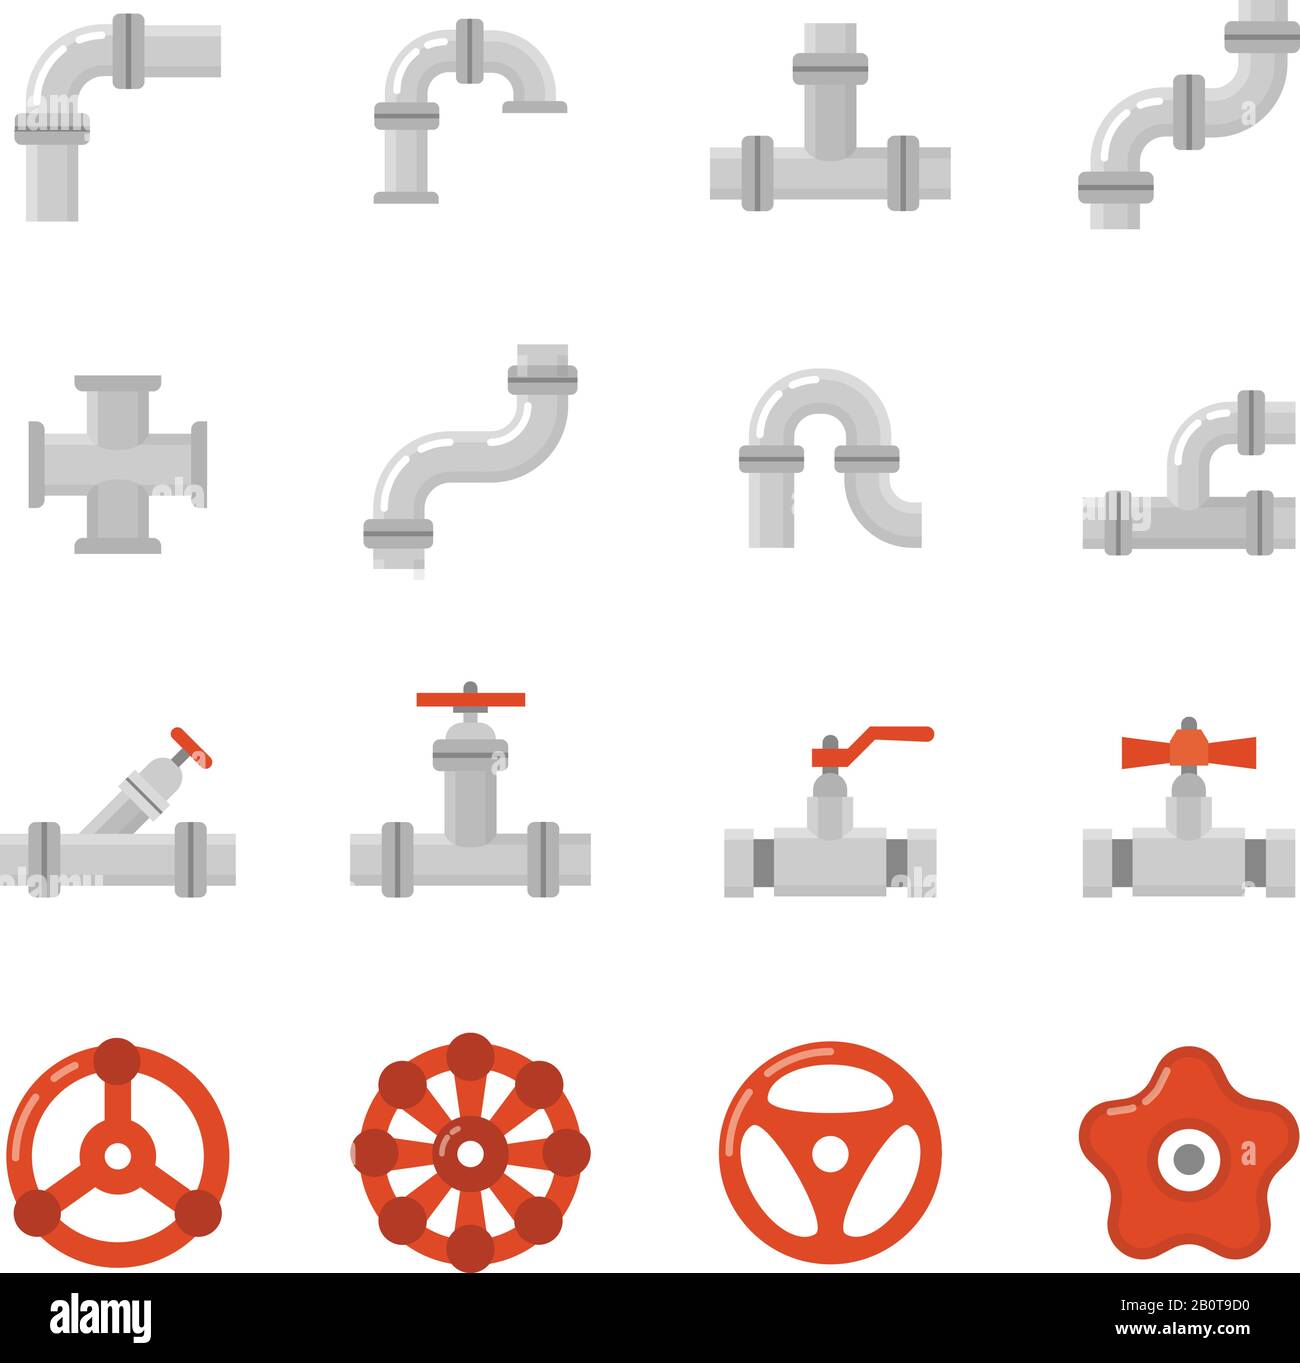 Pipe connector, water pipe fitting flat vector icons for plumbing and piping work. Set of tube construction with valve, illustration of steel tube Stock Vector